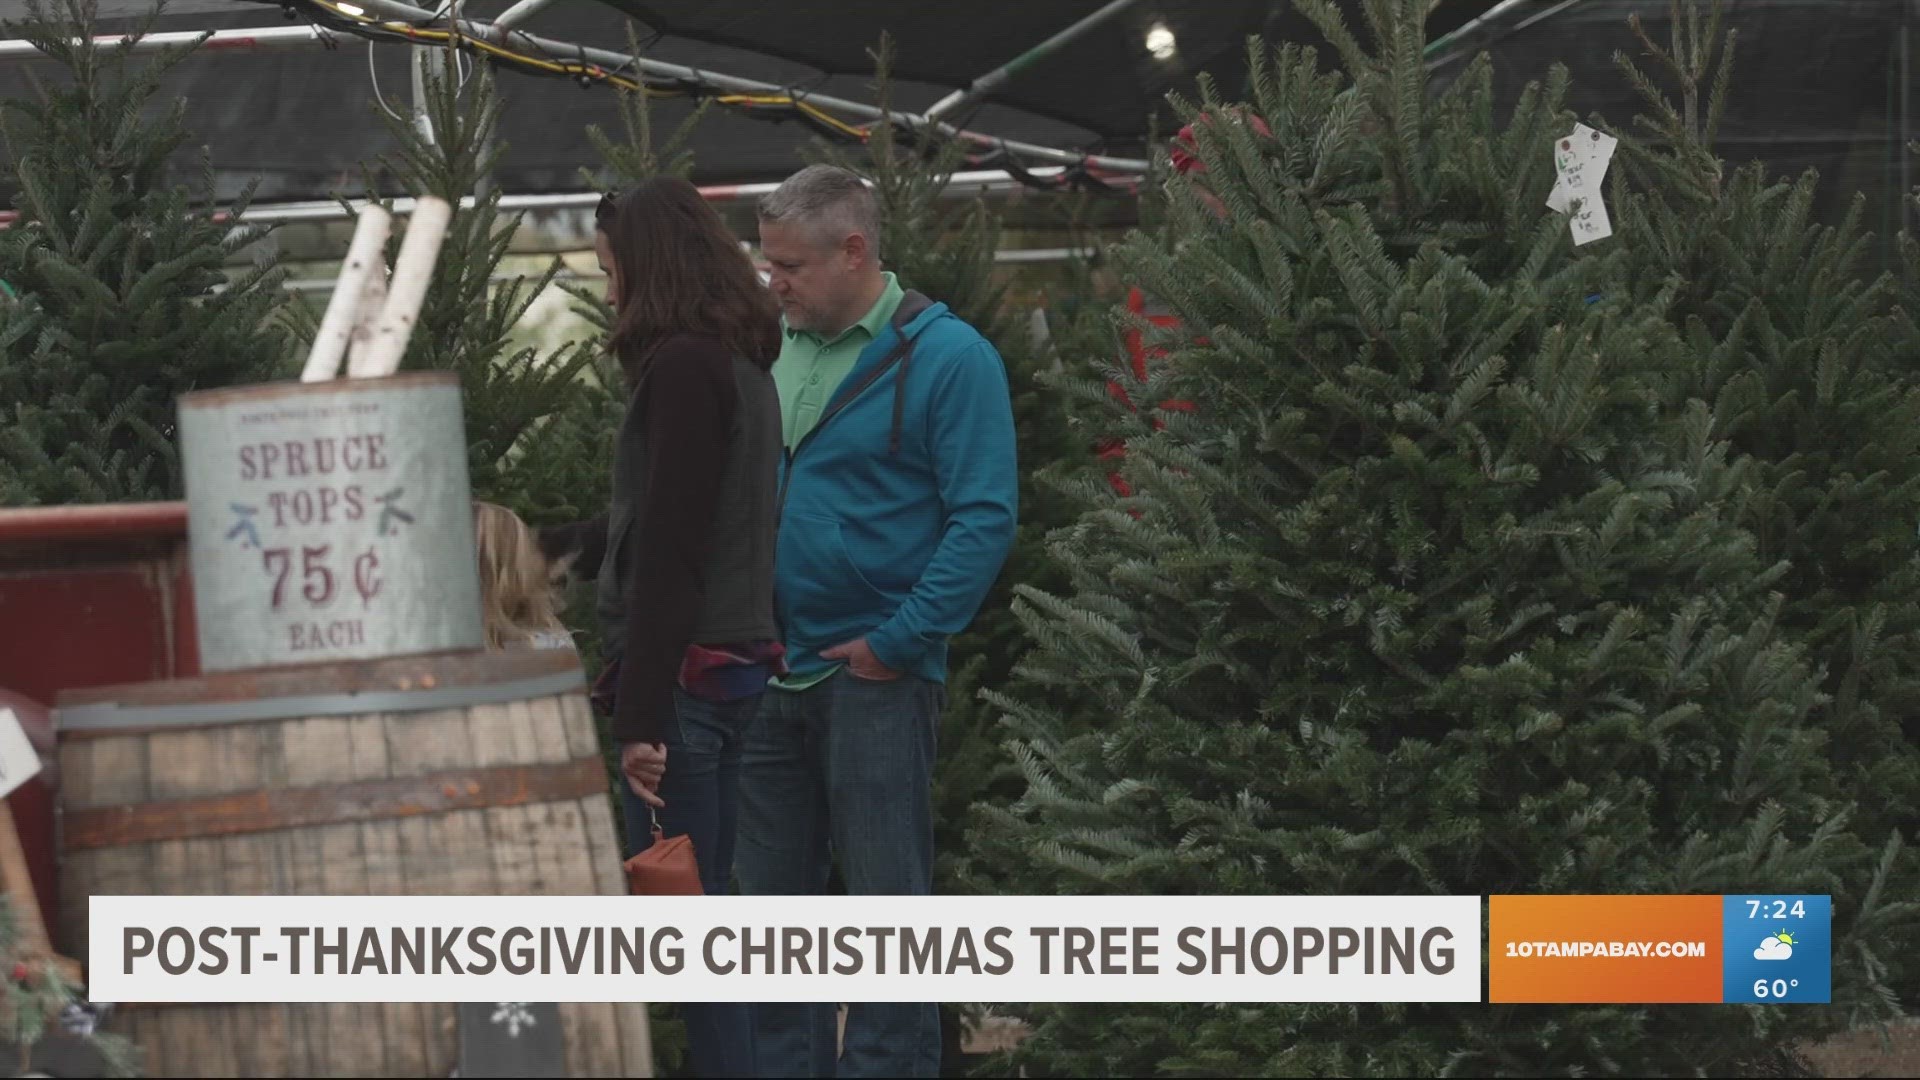 We take a look at the tradition of post-Thanksgiving tree shopping at Gallagher's.